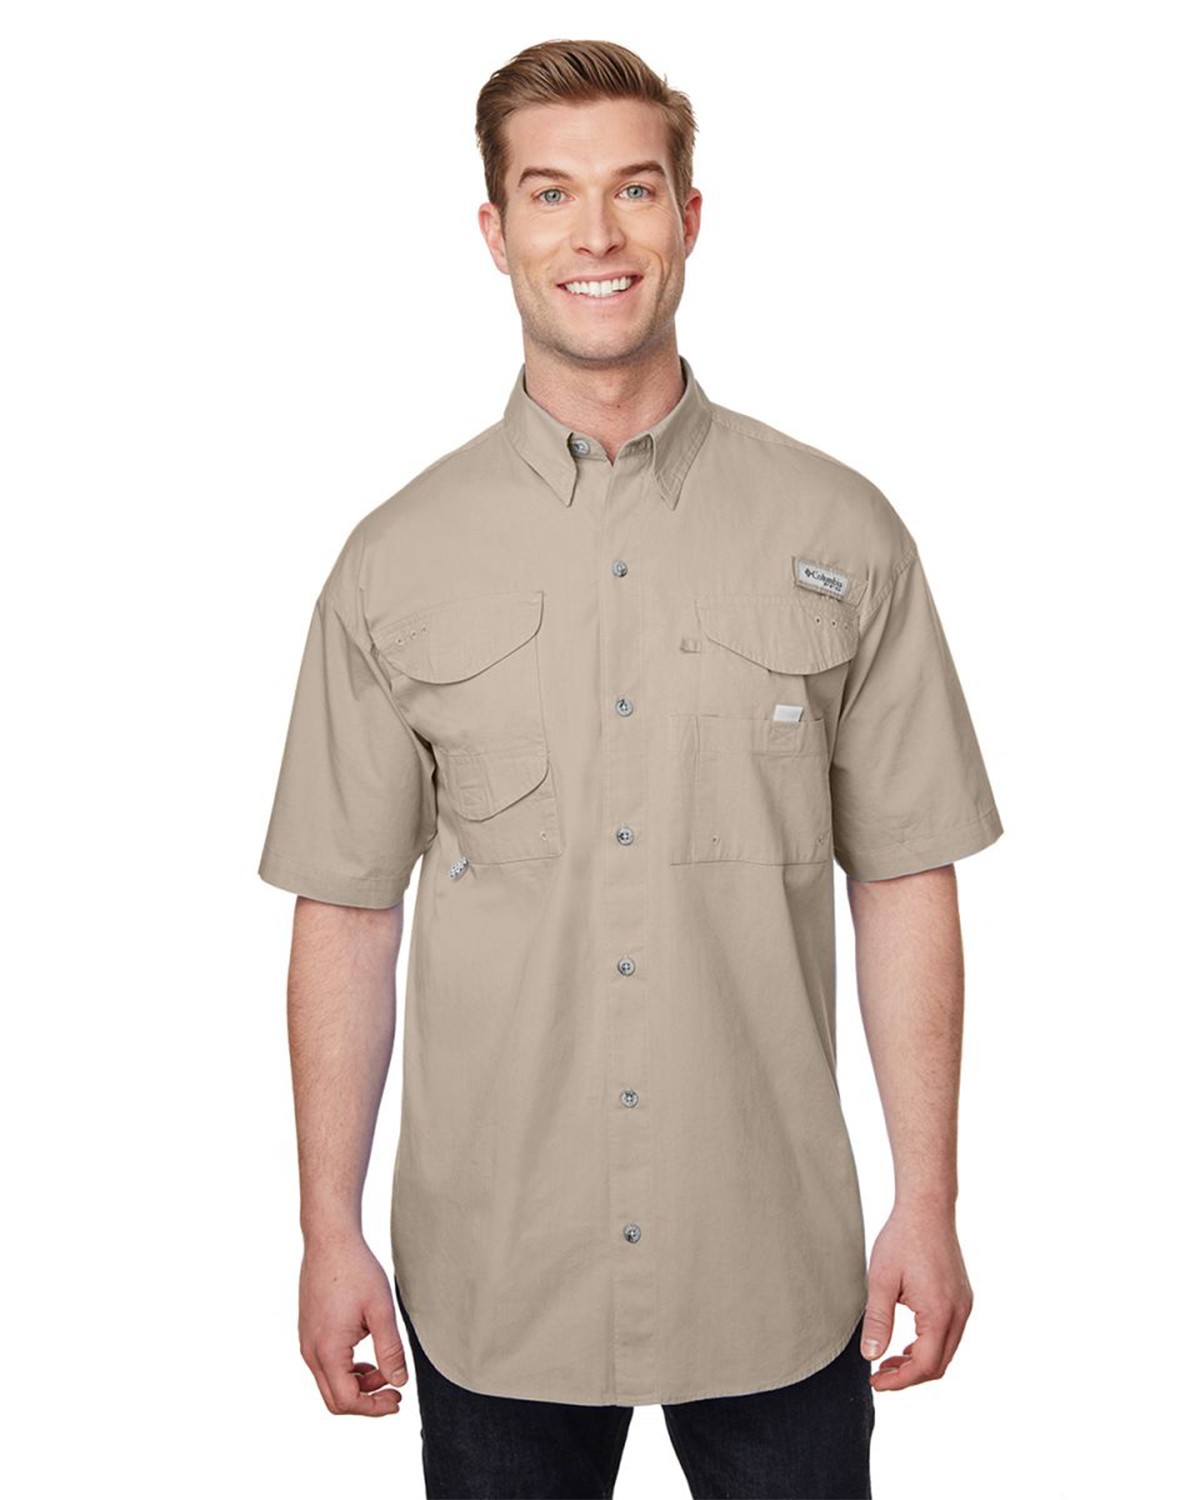 Positive Promotions 3 Columbia Men's Bahama? II Short-Sleeve Fishing Shirts - Embroidered Personalization Available